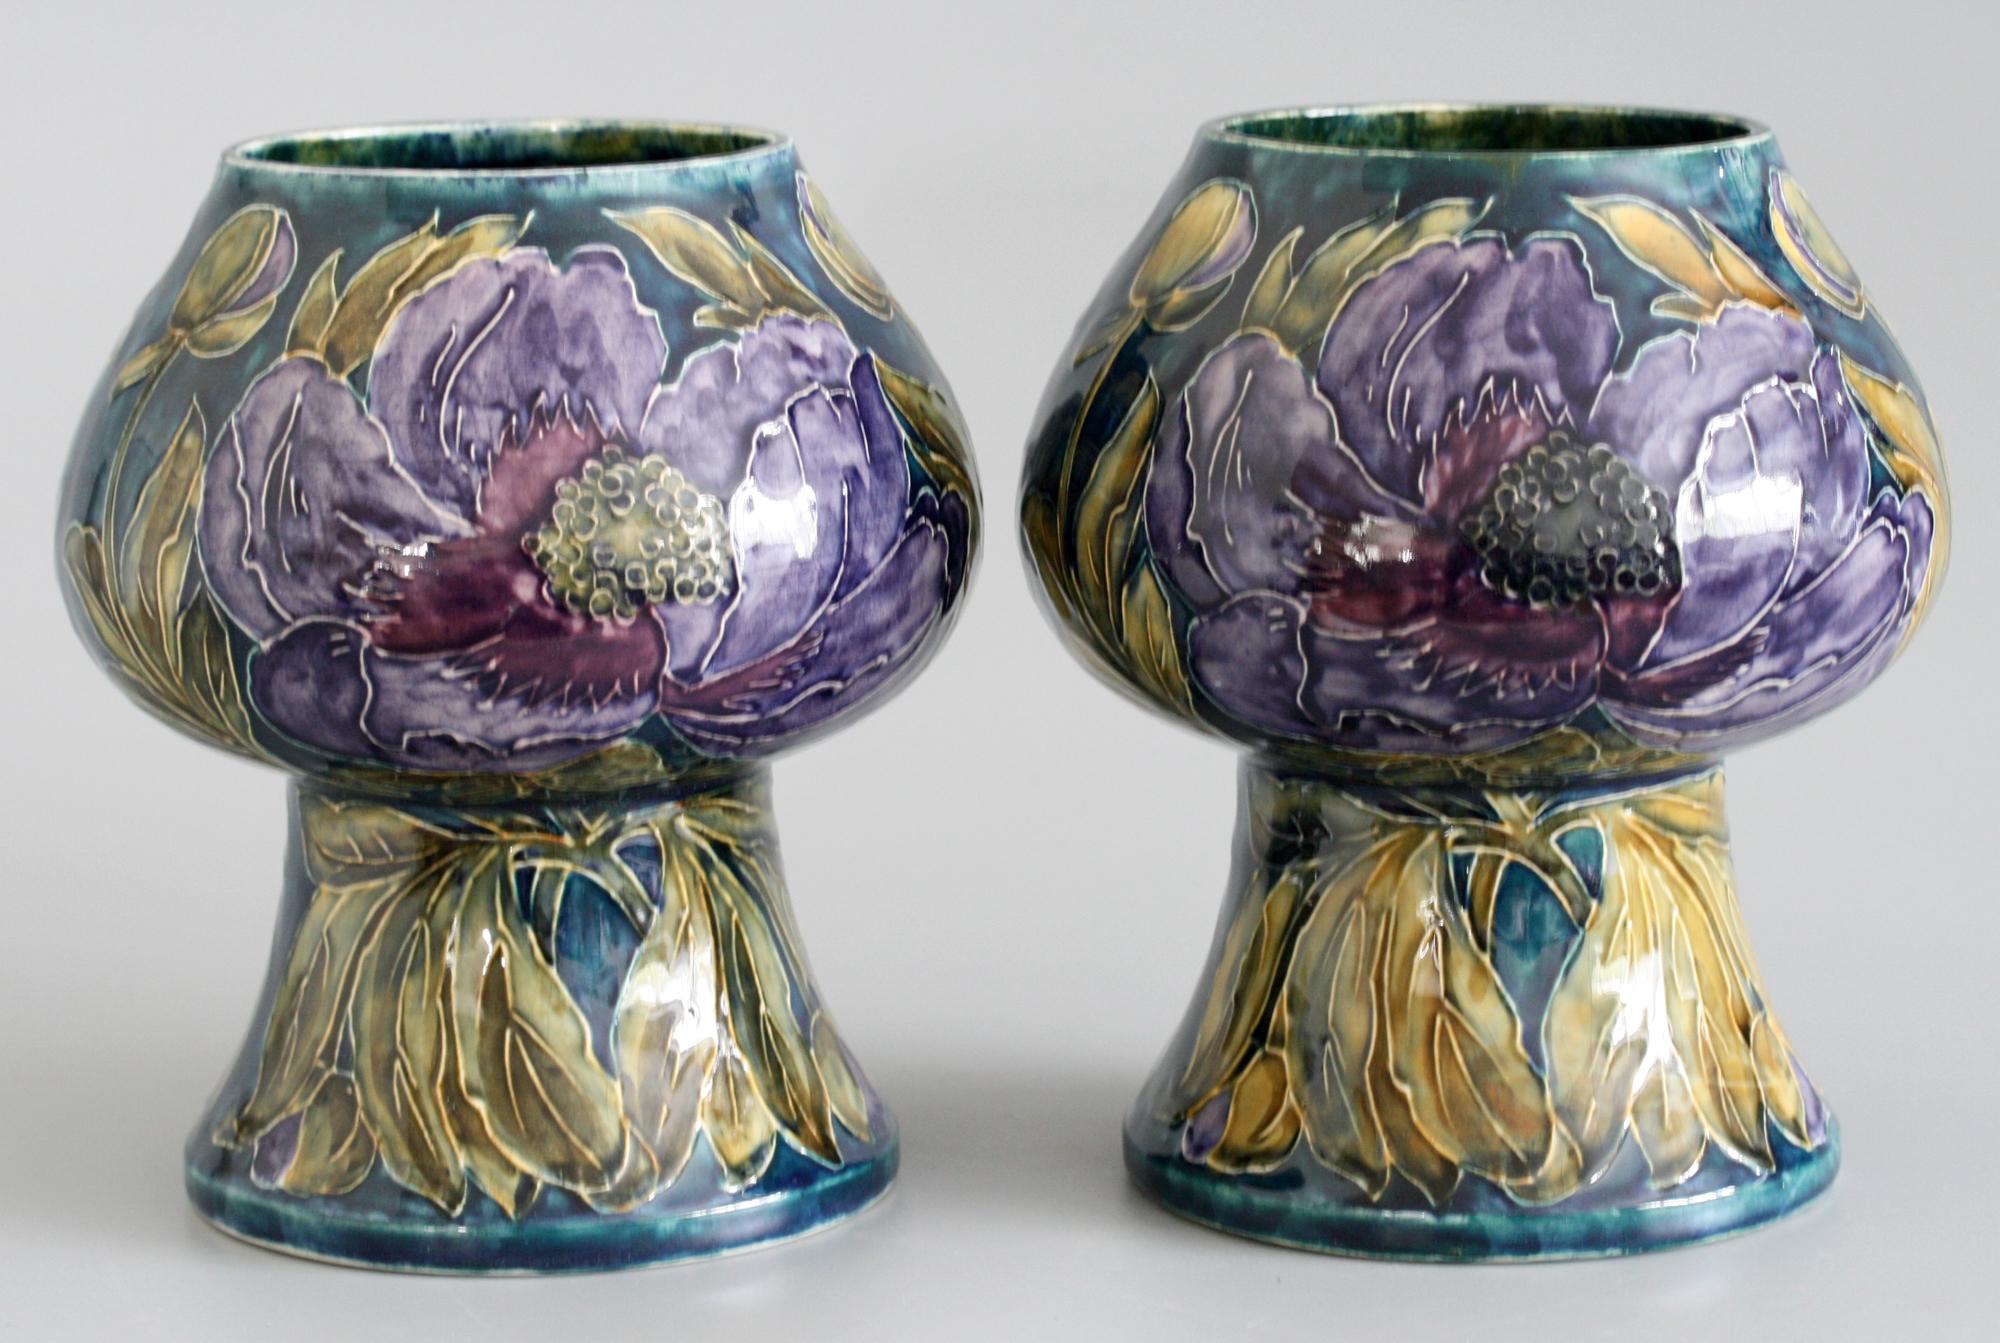 George Cartlidge Pair of Hancock Morris Ware Art Deco Vases Painted with Poppies For Sale 8